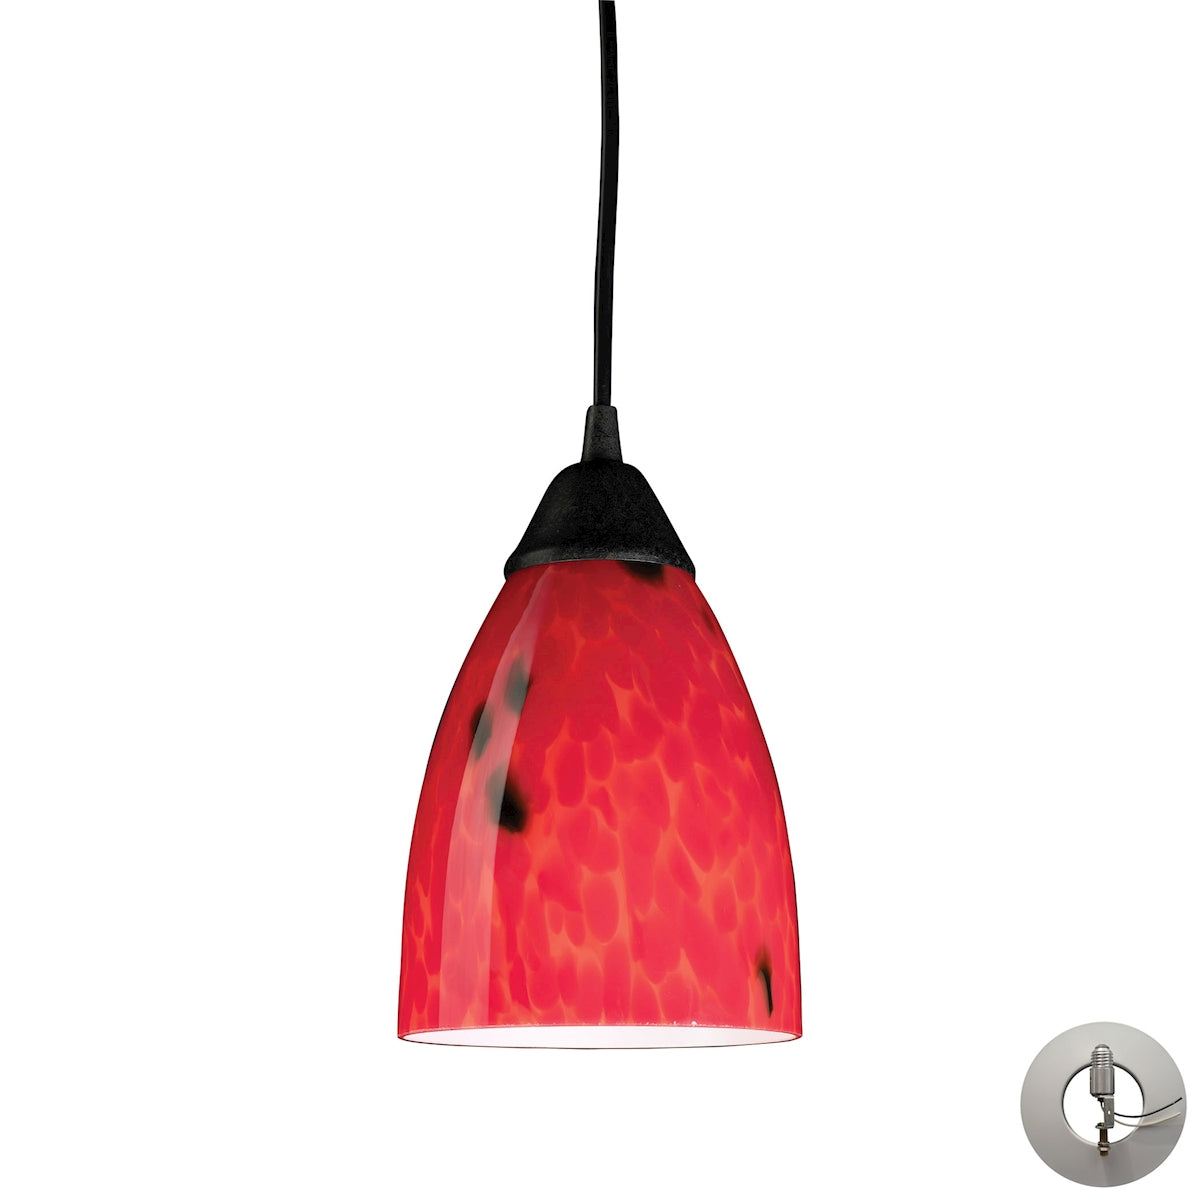 ELK Lighting 406-1FR-LA Classico 1-Light Mini Pendant in Dark Rust with Fire Red Glass - Includes Adapter Kit